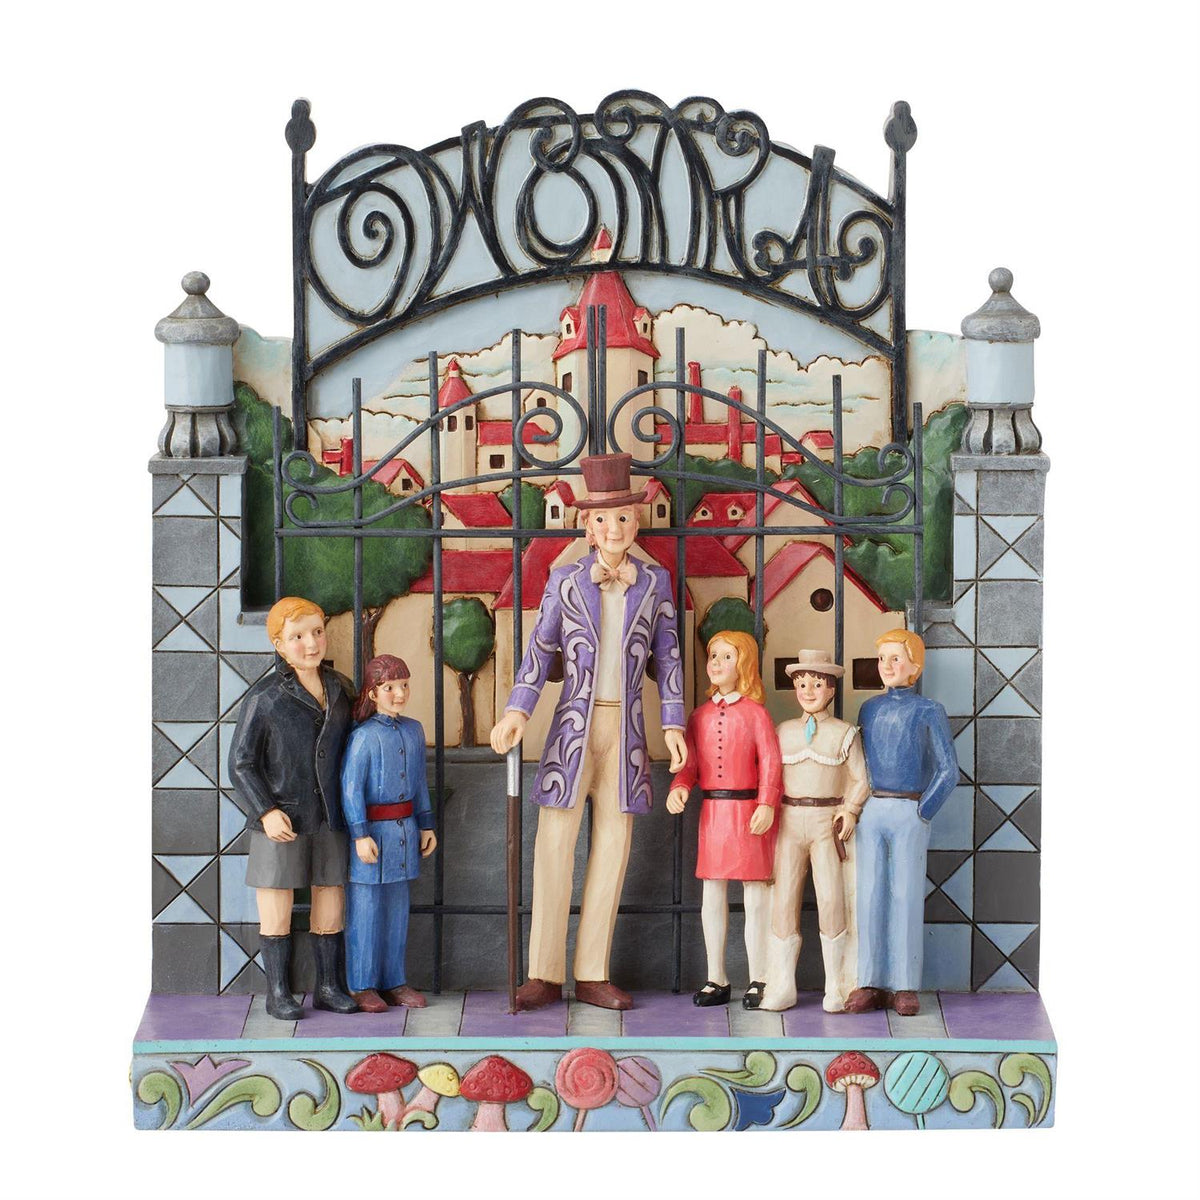 Willy Wonka with Children by Gate Jim Shore Figurine